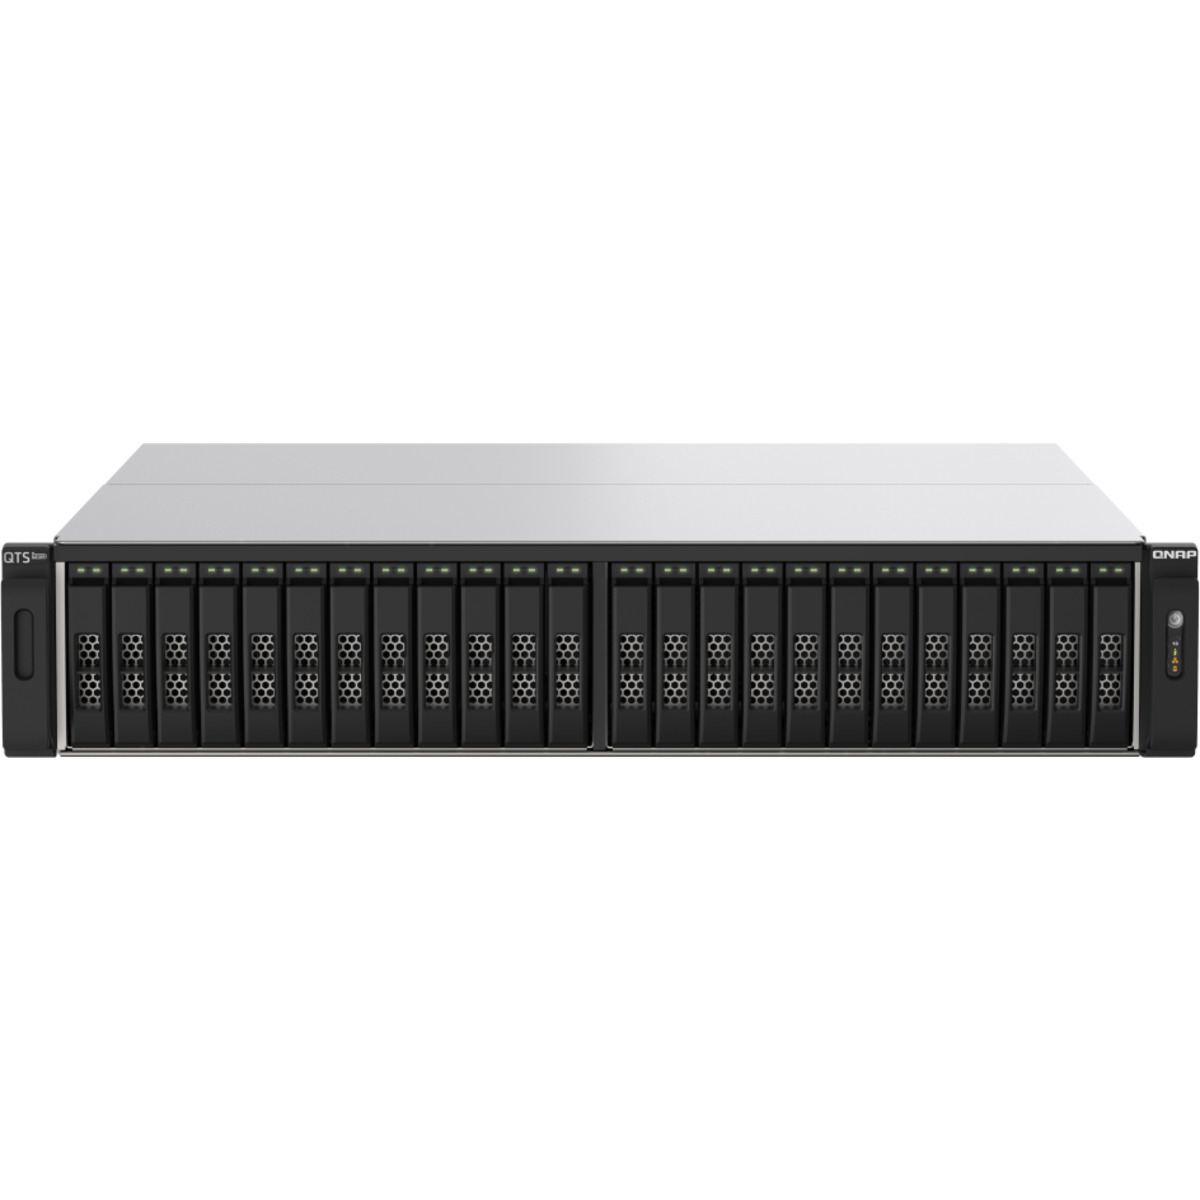 QNAP TS-h2490FU-7232P 5.7tb 24-Bay RackMount Large Business / Enterprise NAS - Network Attached Storage Device 23x250gb Western Digital Red SN700 WDS250G1R0C  3100/1600MB/s M.2 2280 NVMe SSD NAS Class Drives Installed - Burn-In Tested TS-h2490FU-7232P